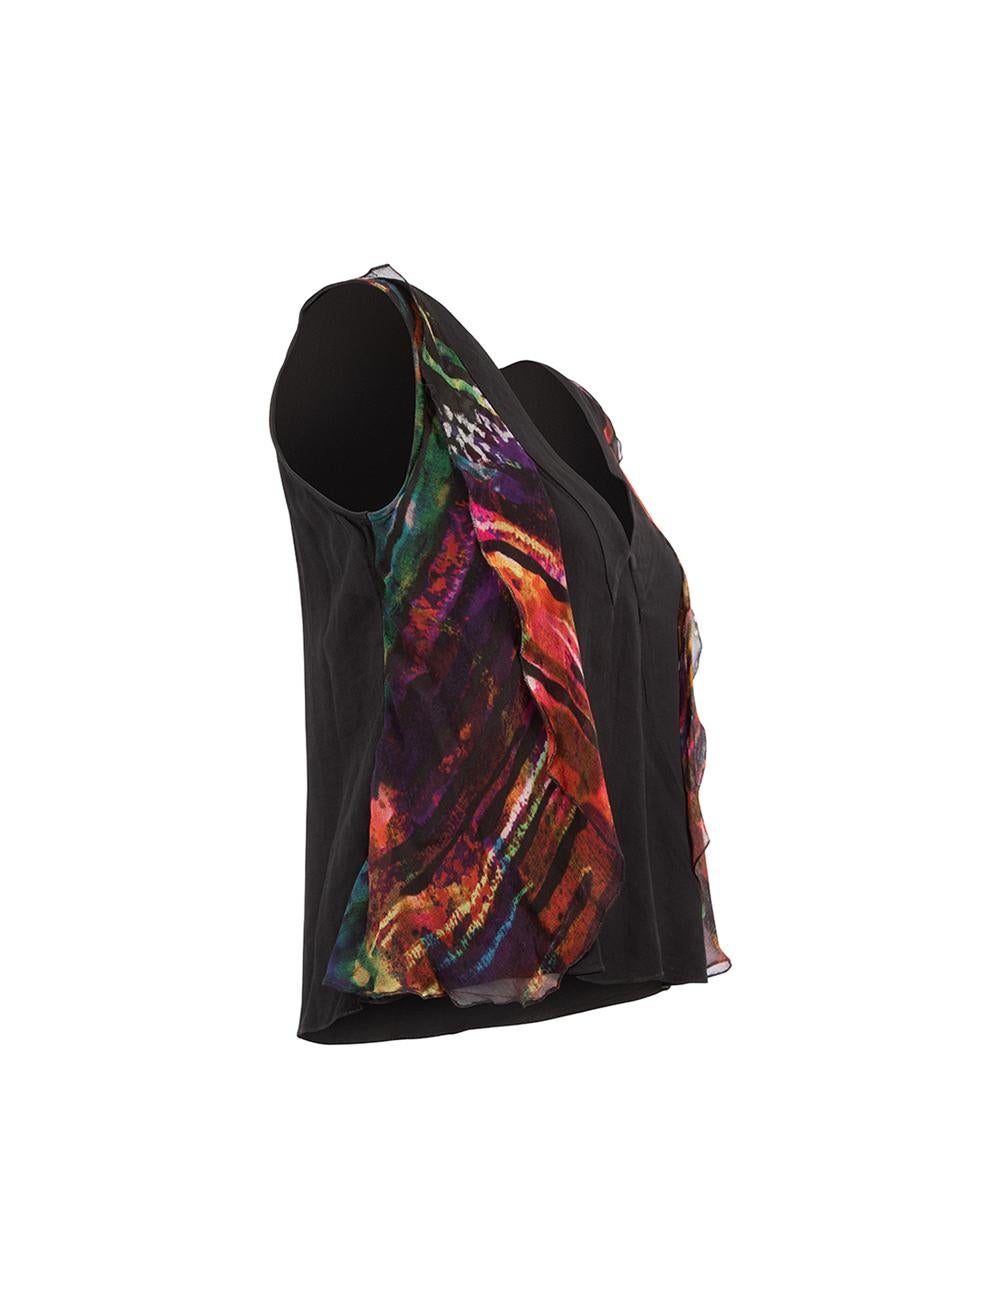 CONDITION is Very good. Minimal wear to blouse is evident. Stain on the front of the blouse is seen on this used Erdem designer resale item. Details Black and multicolour Synthetic Sleeveless blouse V neckline Watercolour patterned ruffles panel on